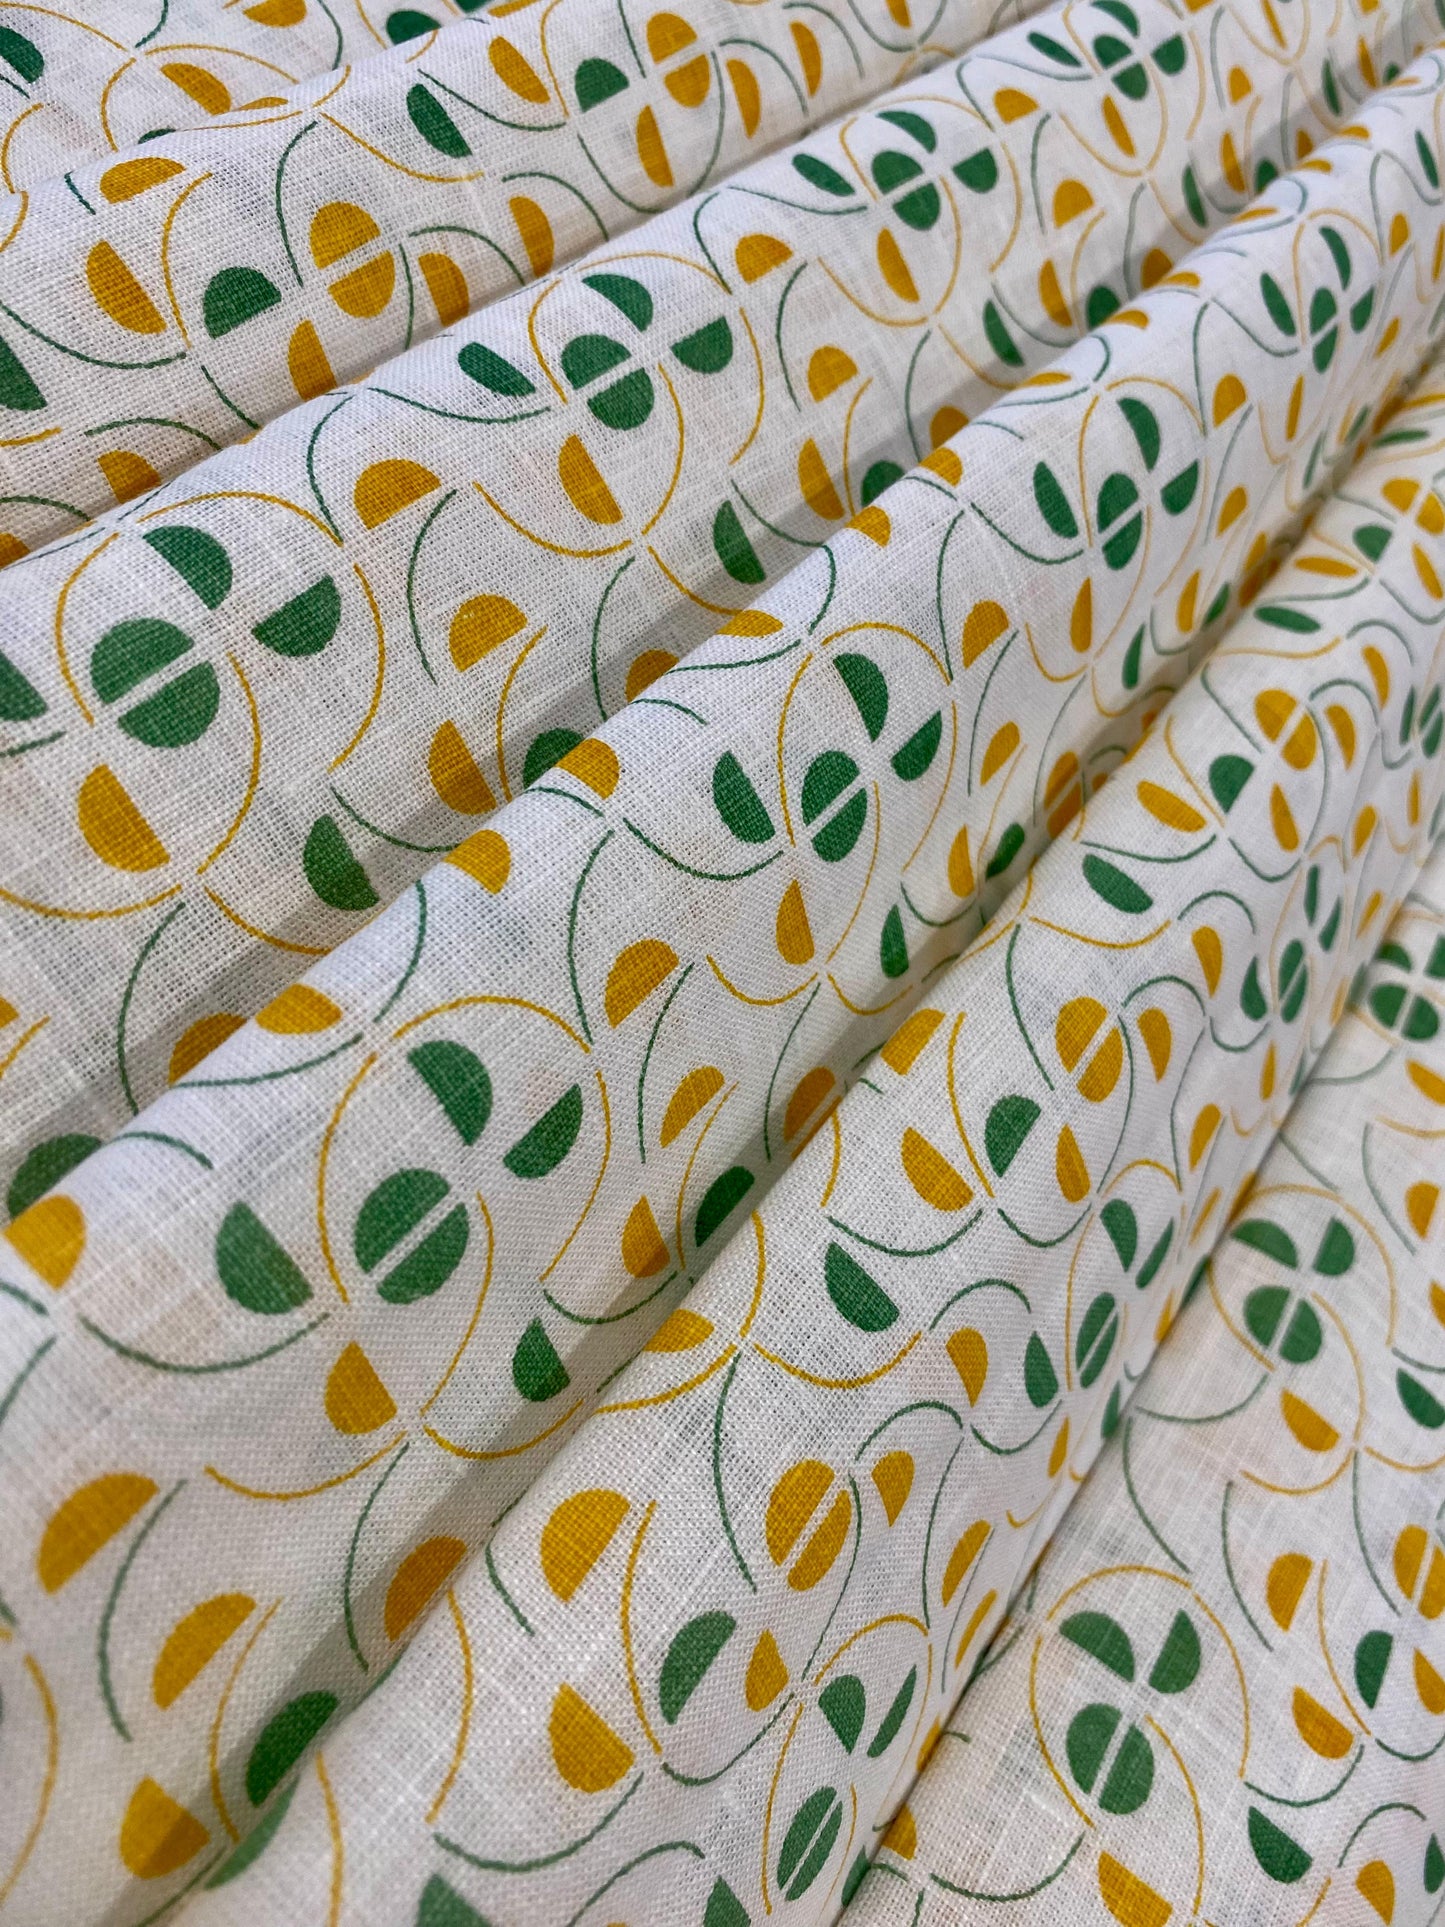 White-Green/Orange Leaf Allover Printed Linen Fabric - Dyed Premium Linen Fabric AWP-001